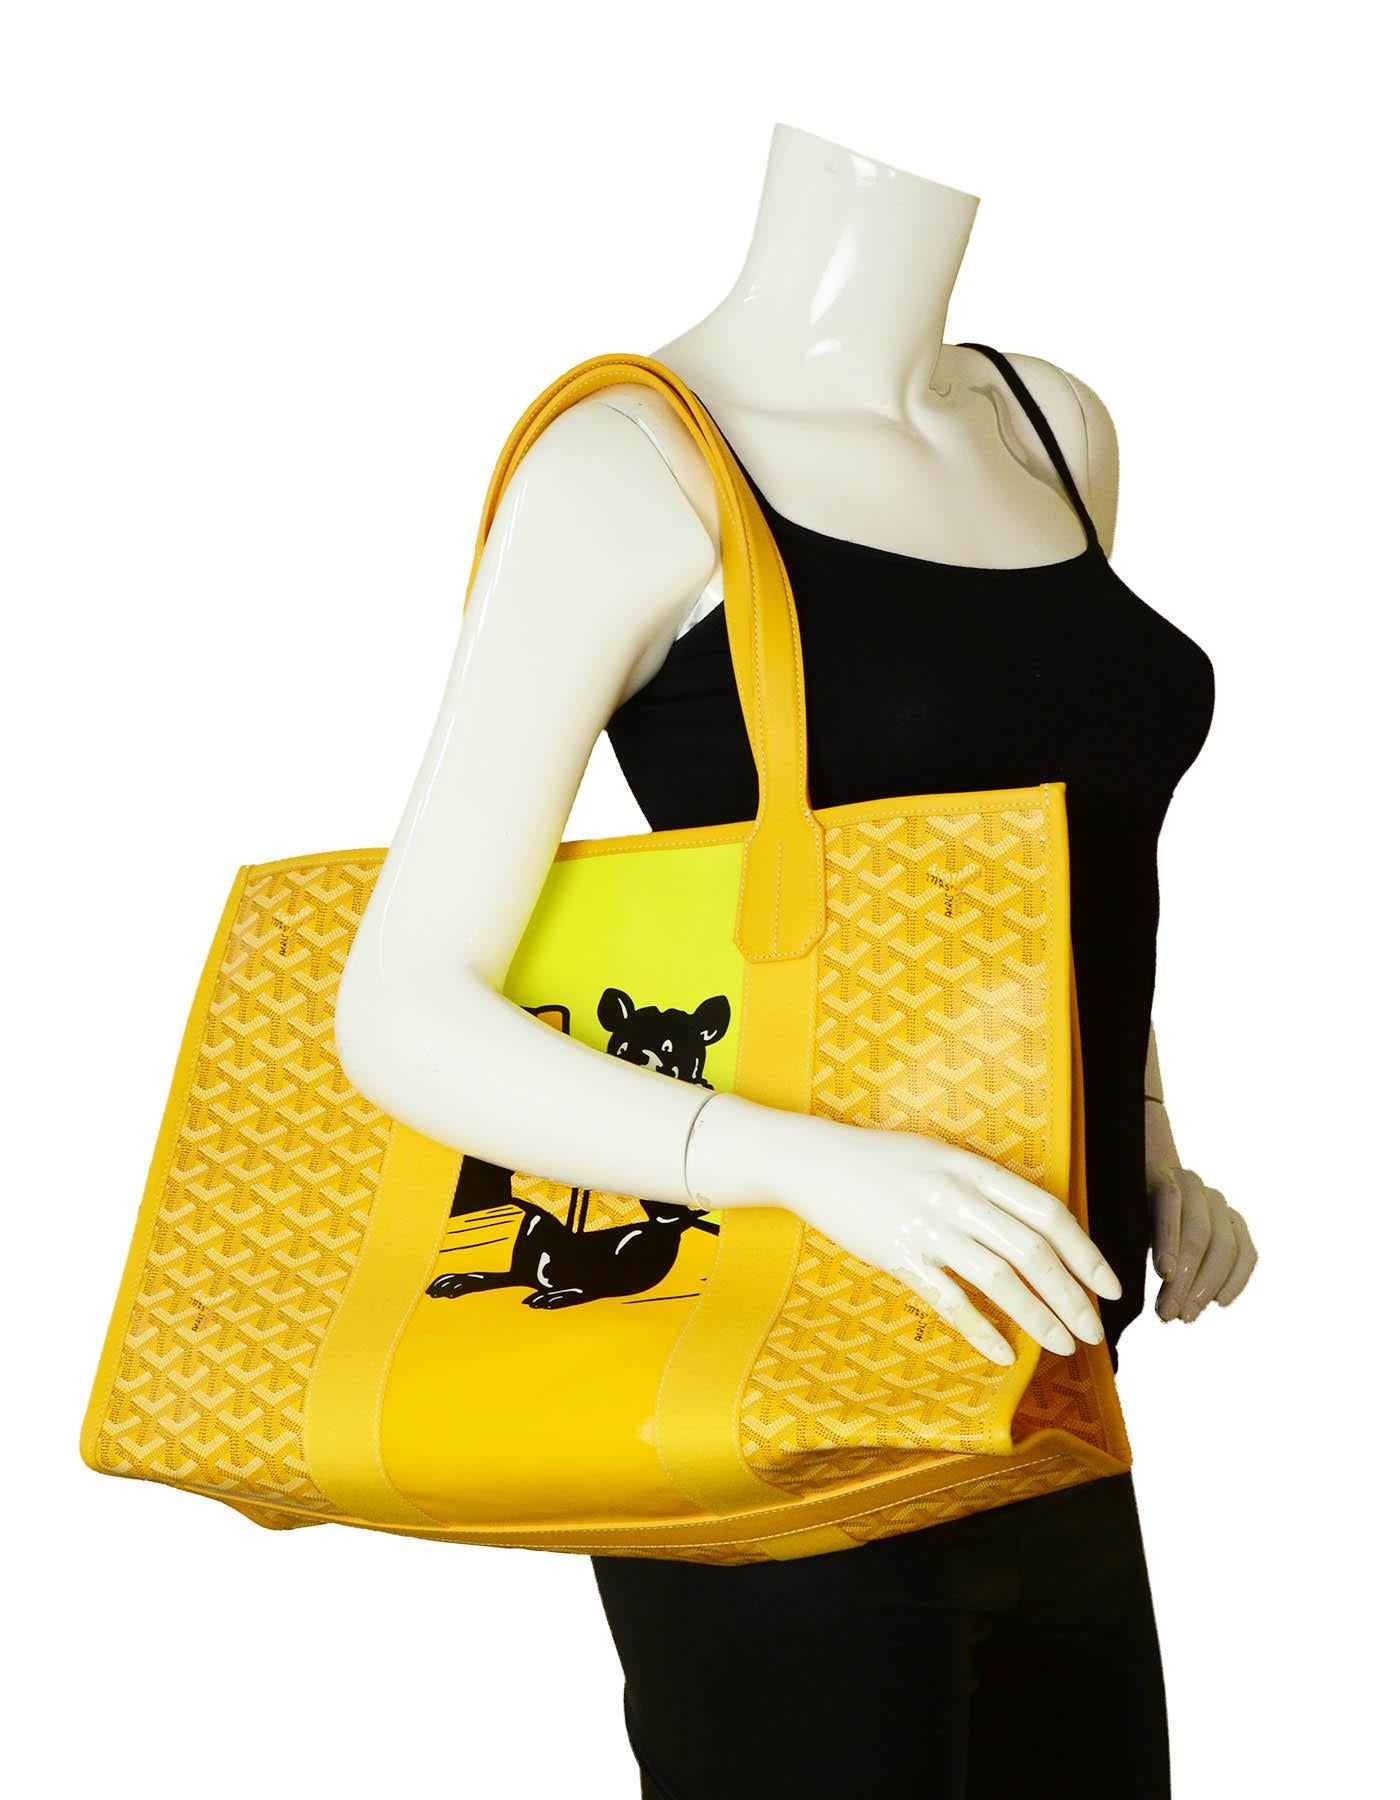 Goyard 2020 Yellow Goyardine Bulldog Villette Tote

Made In: France
Year of Production: 2020
Color: Yellow with black
Materials: Coated canvas and leather
Lining: Canvas
Closure/Opening: Open top
Exterior Pockets: N/A
Interior Pockets: N/A
Exterior